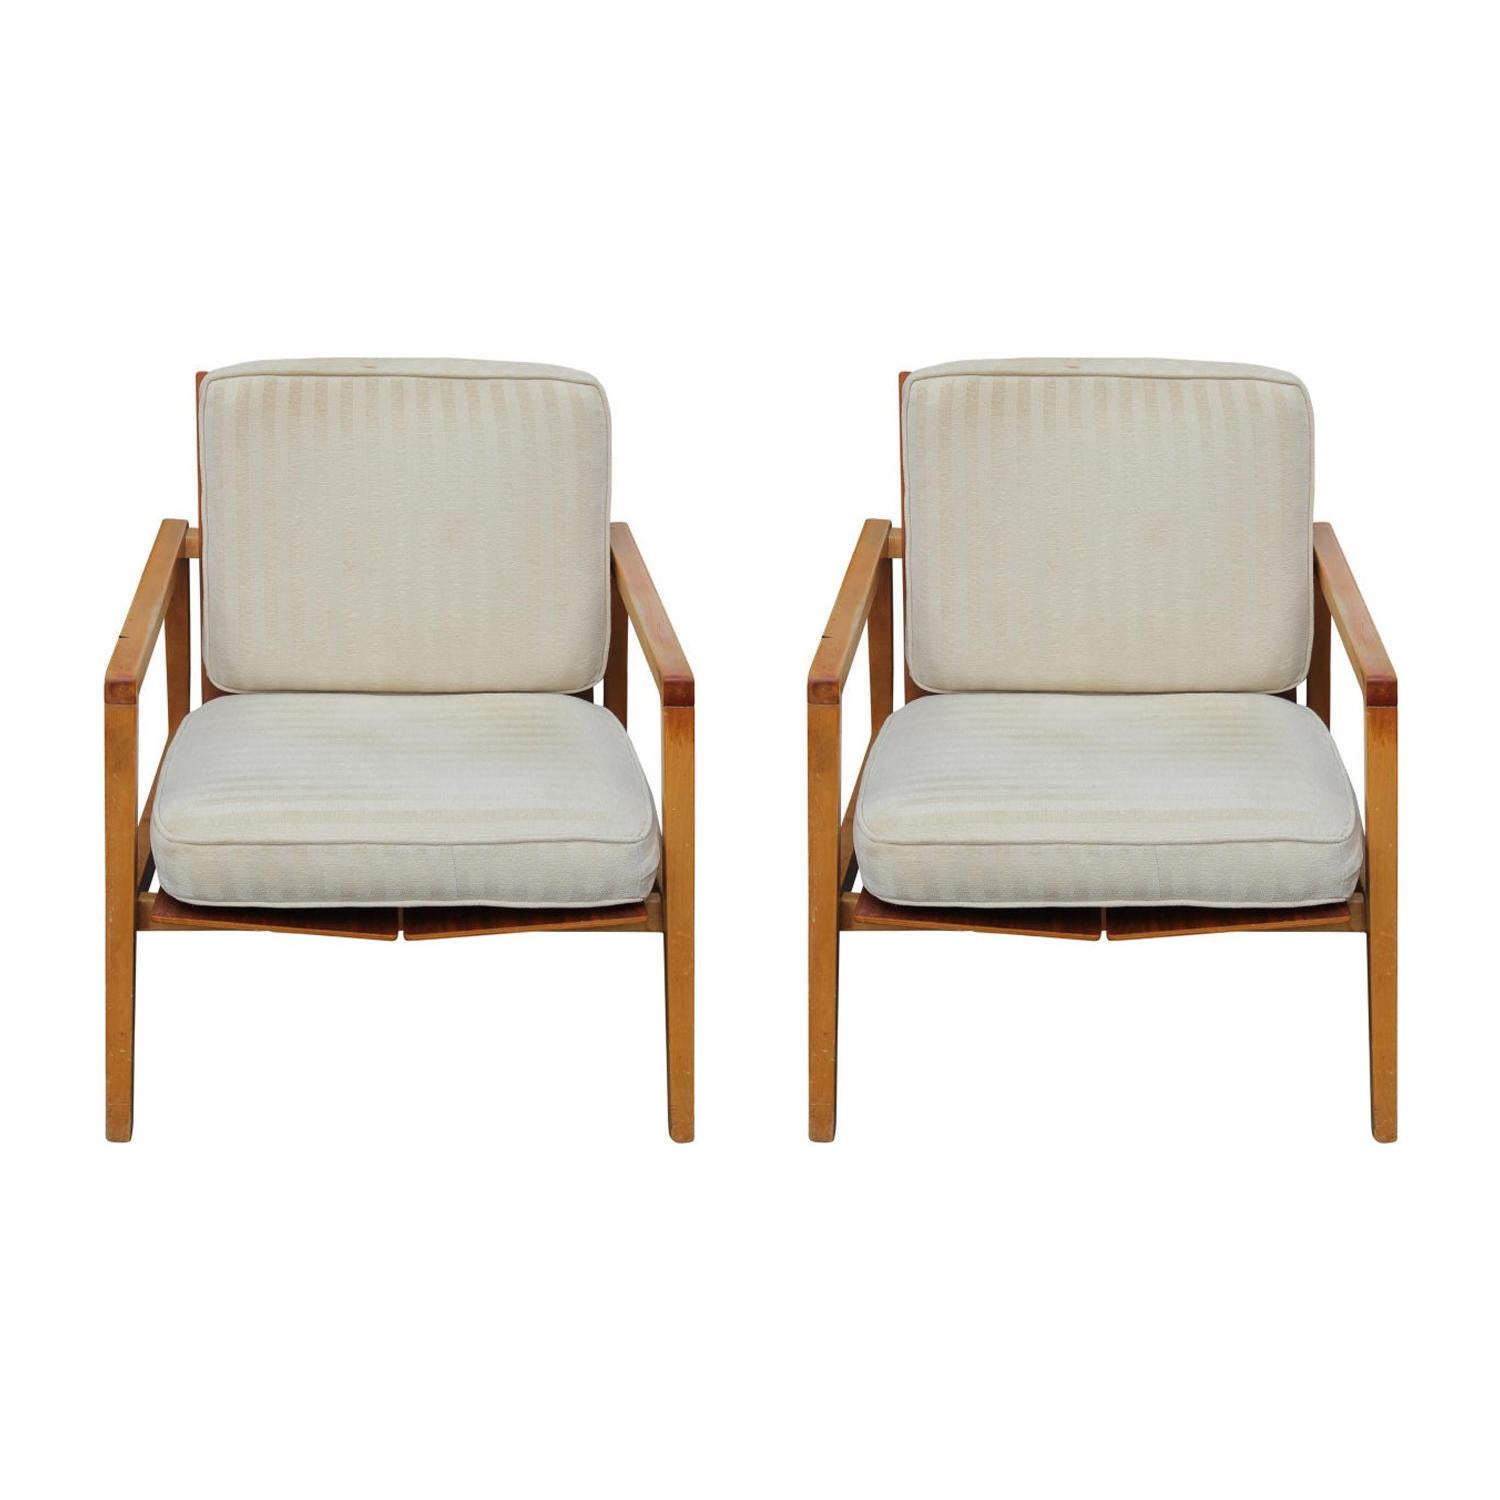 Pair of upholstered Model no. 655 lounge chairs raised on amaple frame with walnut seat and back supports. Designed by Lewis Butler for Knoll, circa 1955. Re-upholstery is suggested.
 